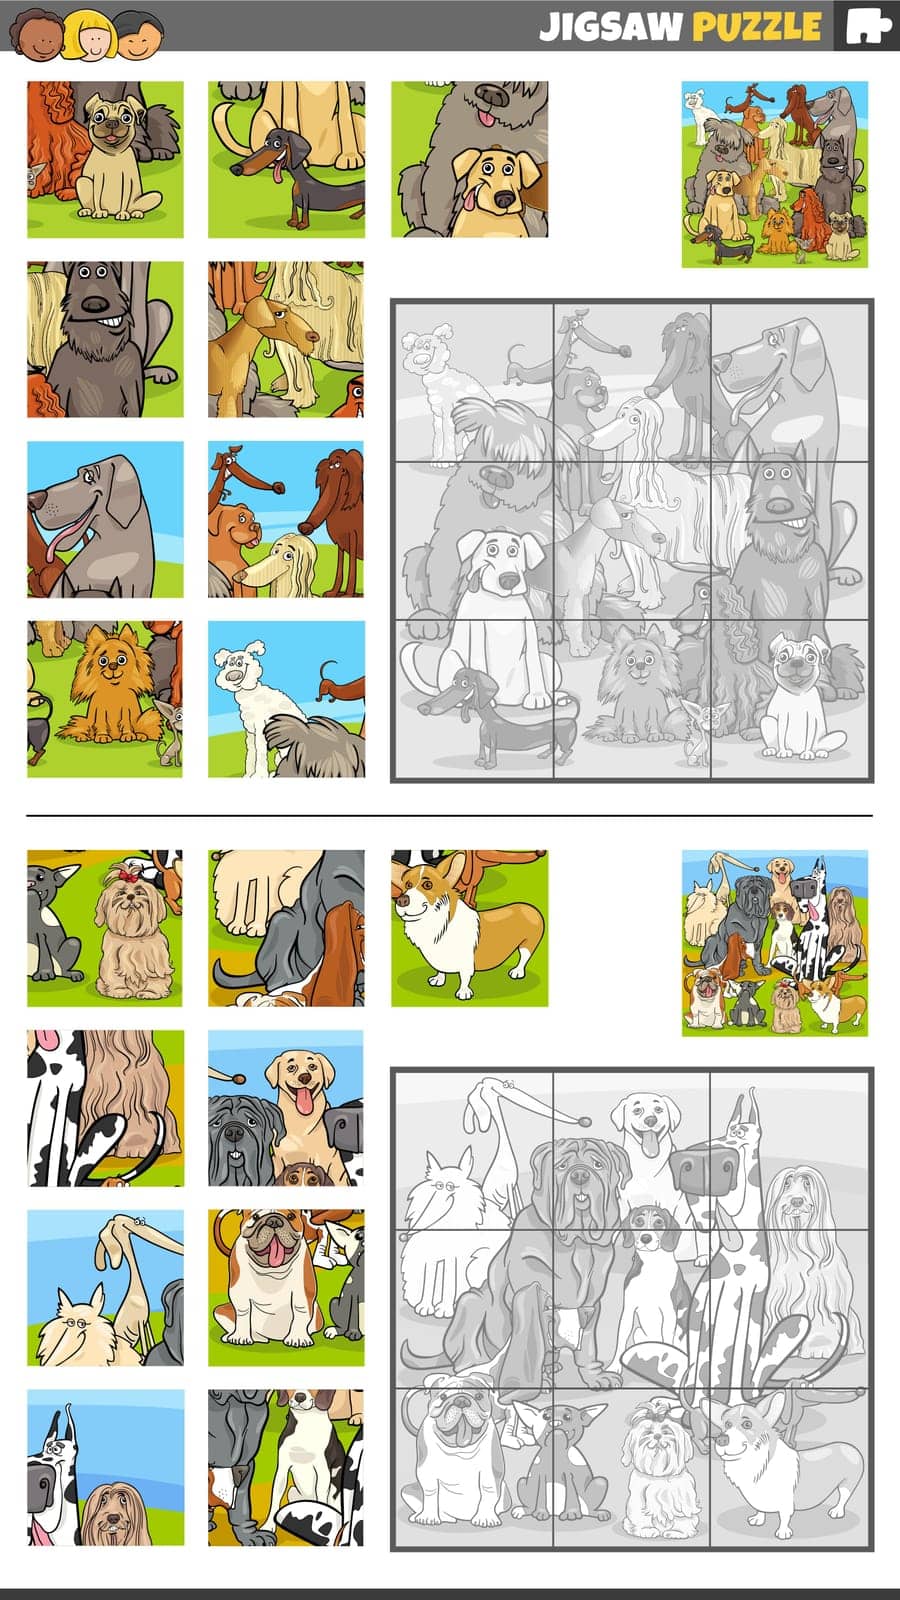 Cartoon illustration of educational jigsaw puzzle activities set with purebred dogs animal characters group